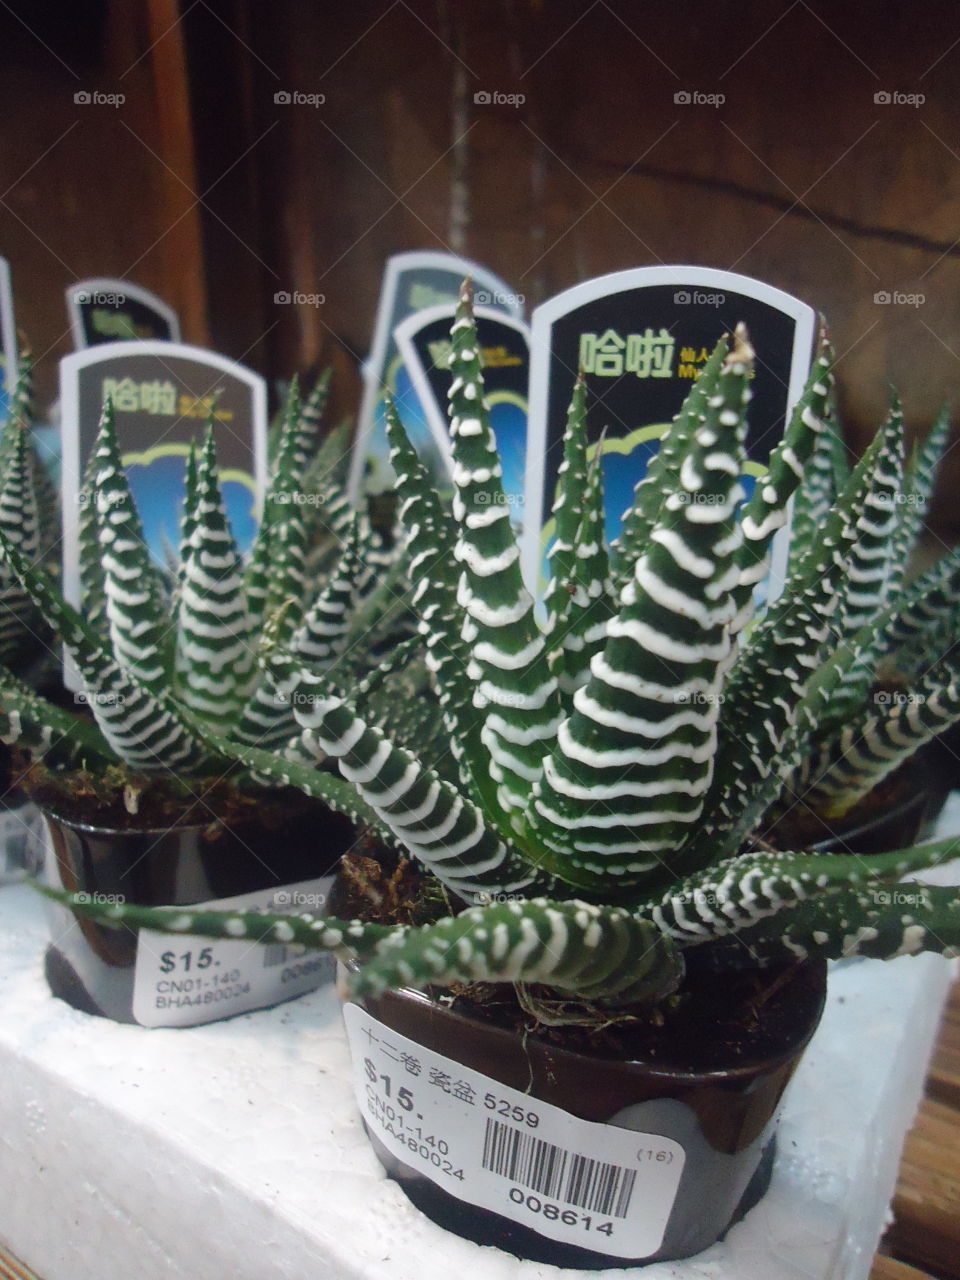 cactus. variety of cactis for sale in hongkong when we were there